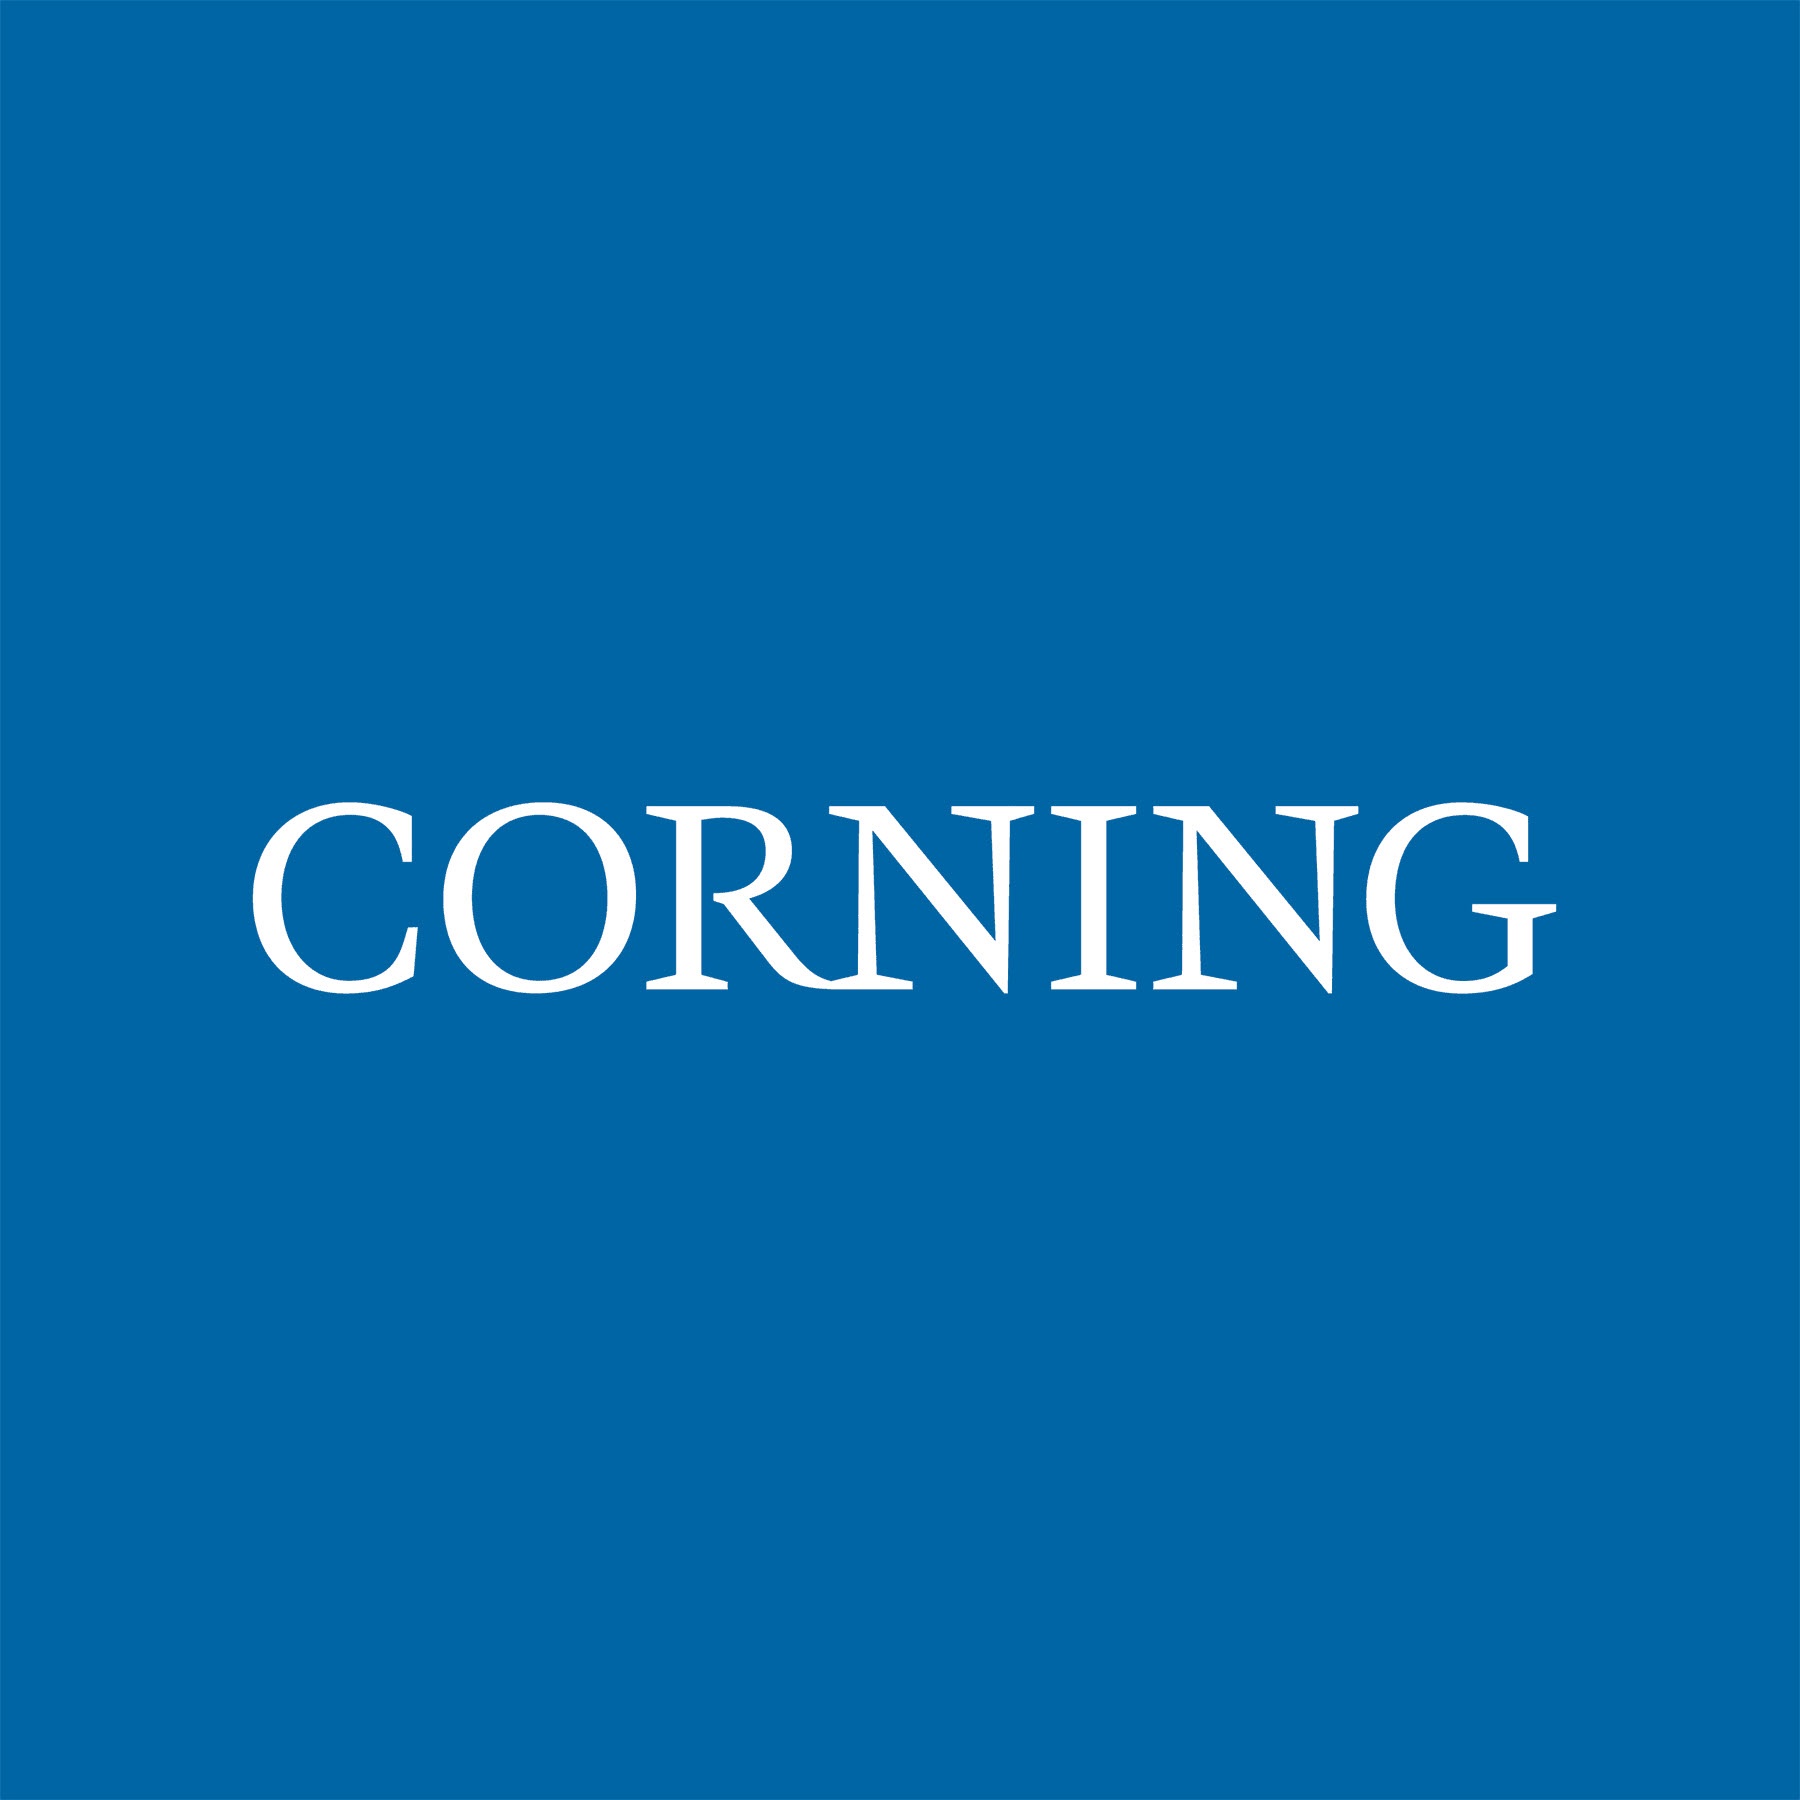 Corning Incorporated The American Ceramic Society